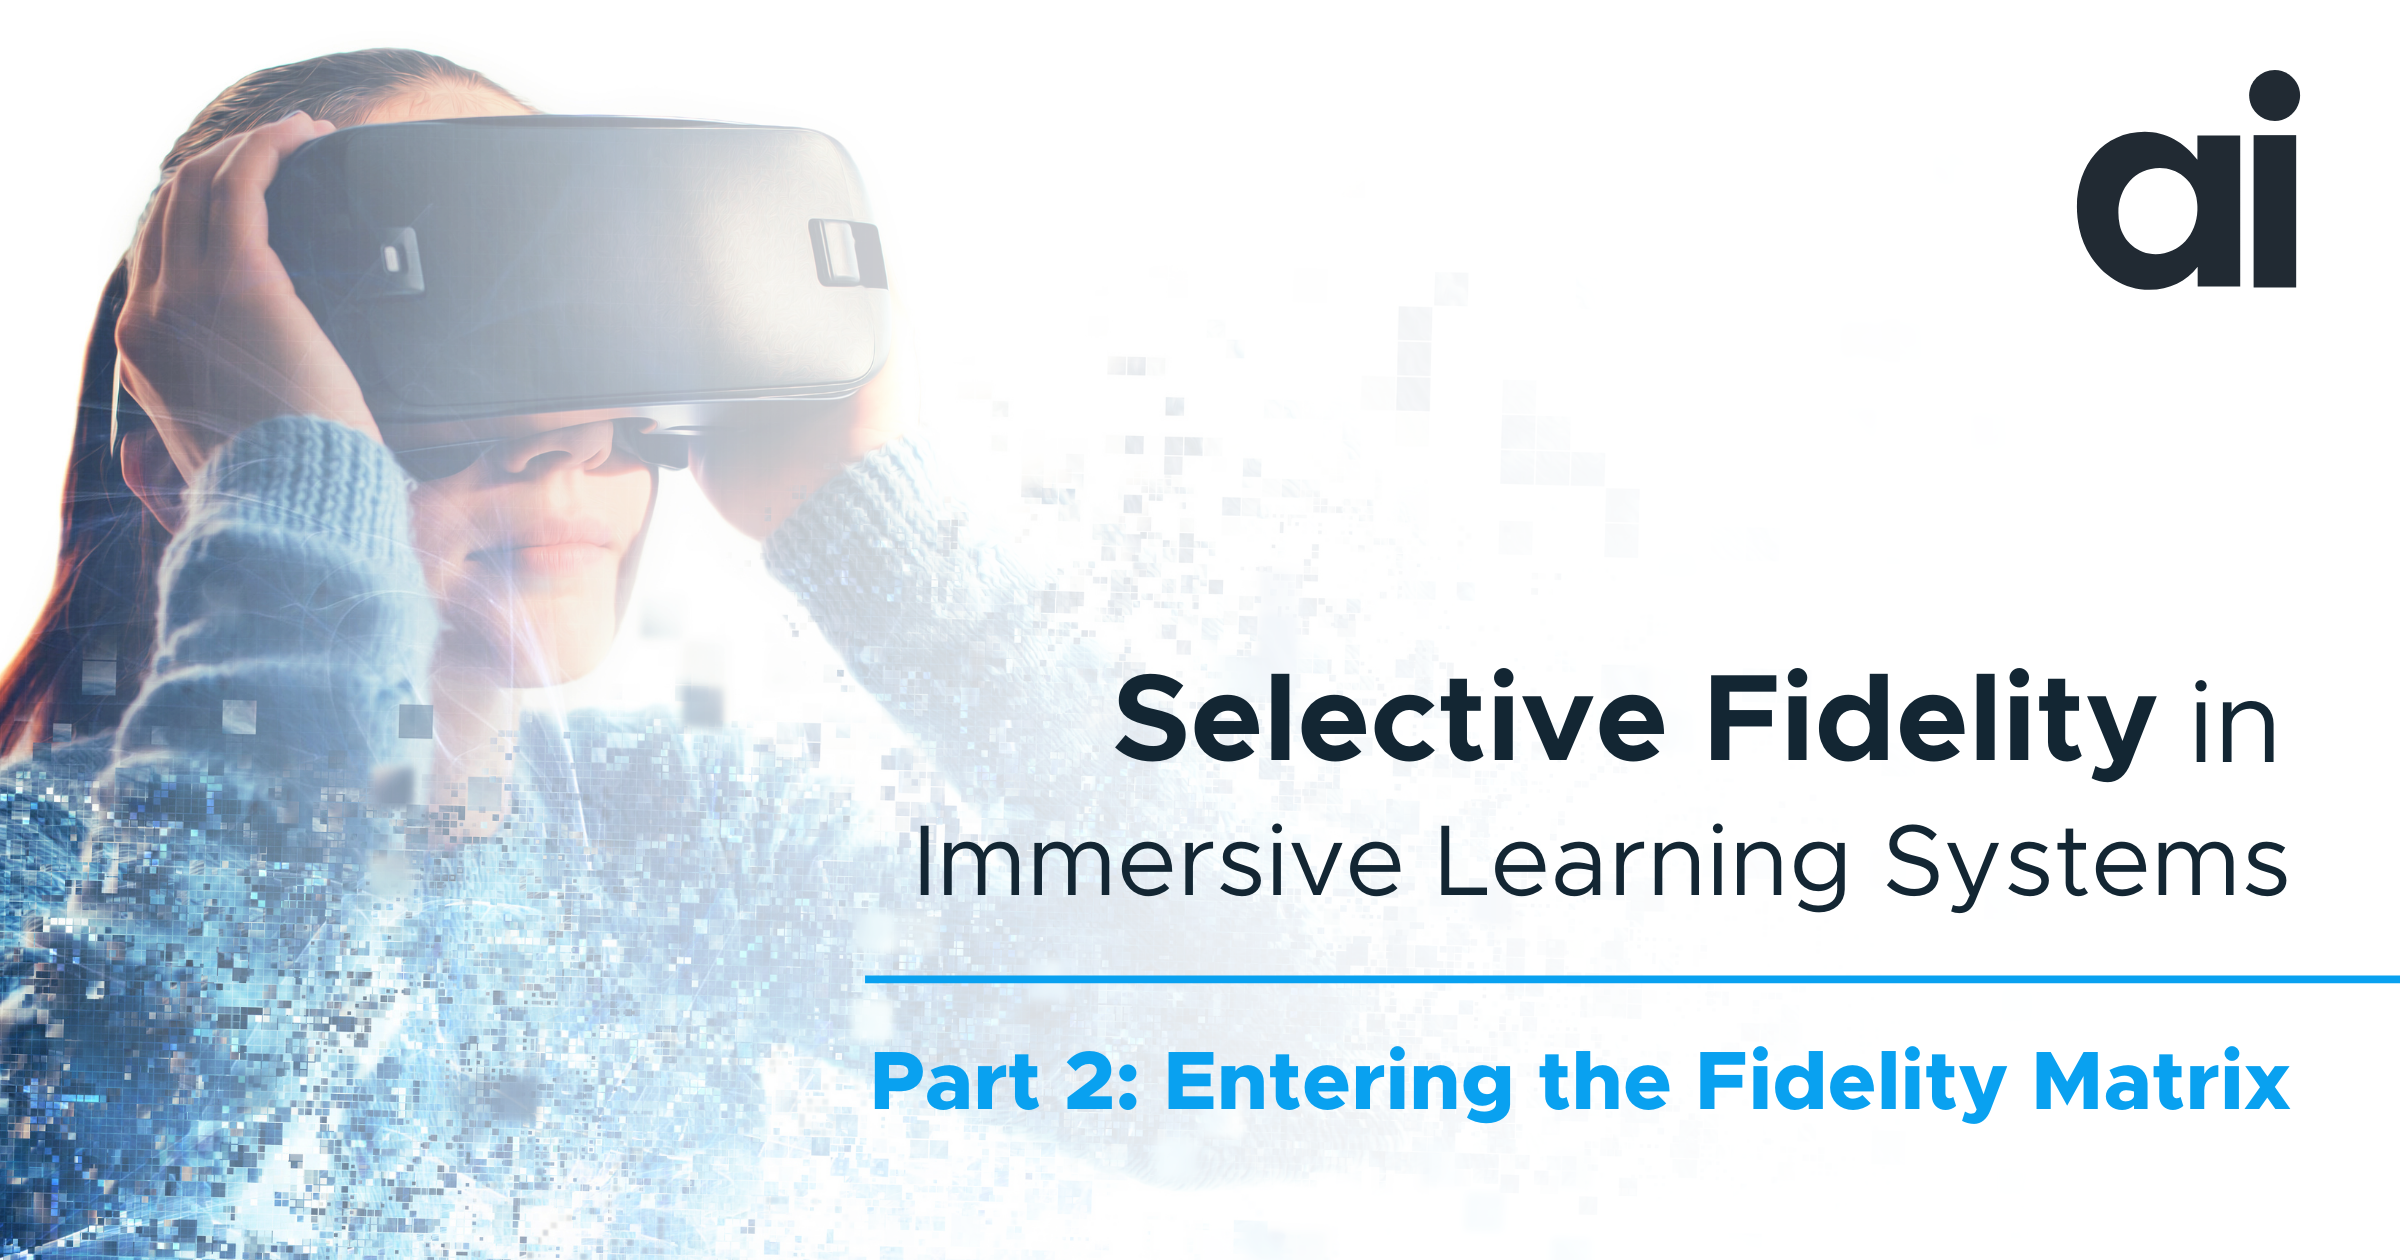 Selective Fidelity in Immersive Learning Systems - Part 2: Entering the Fidelity Matrix